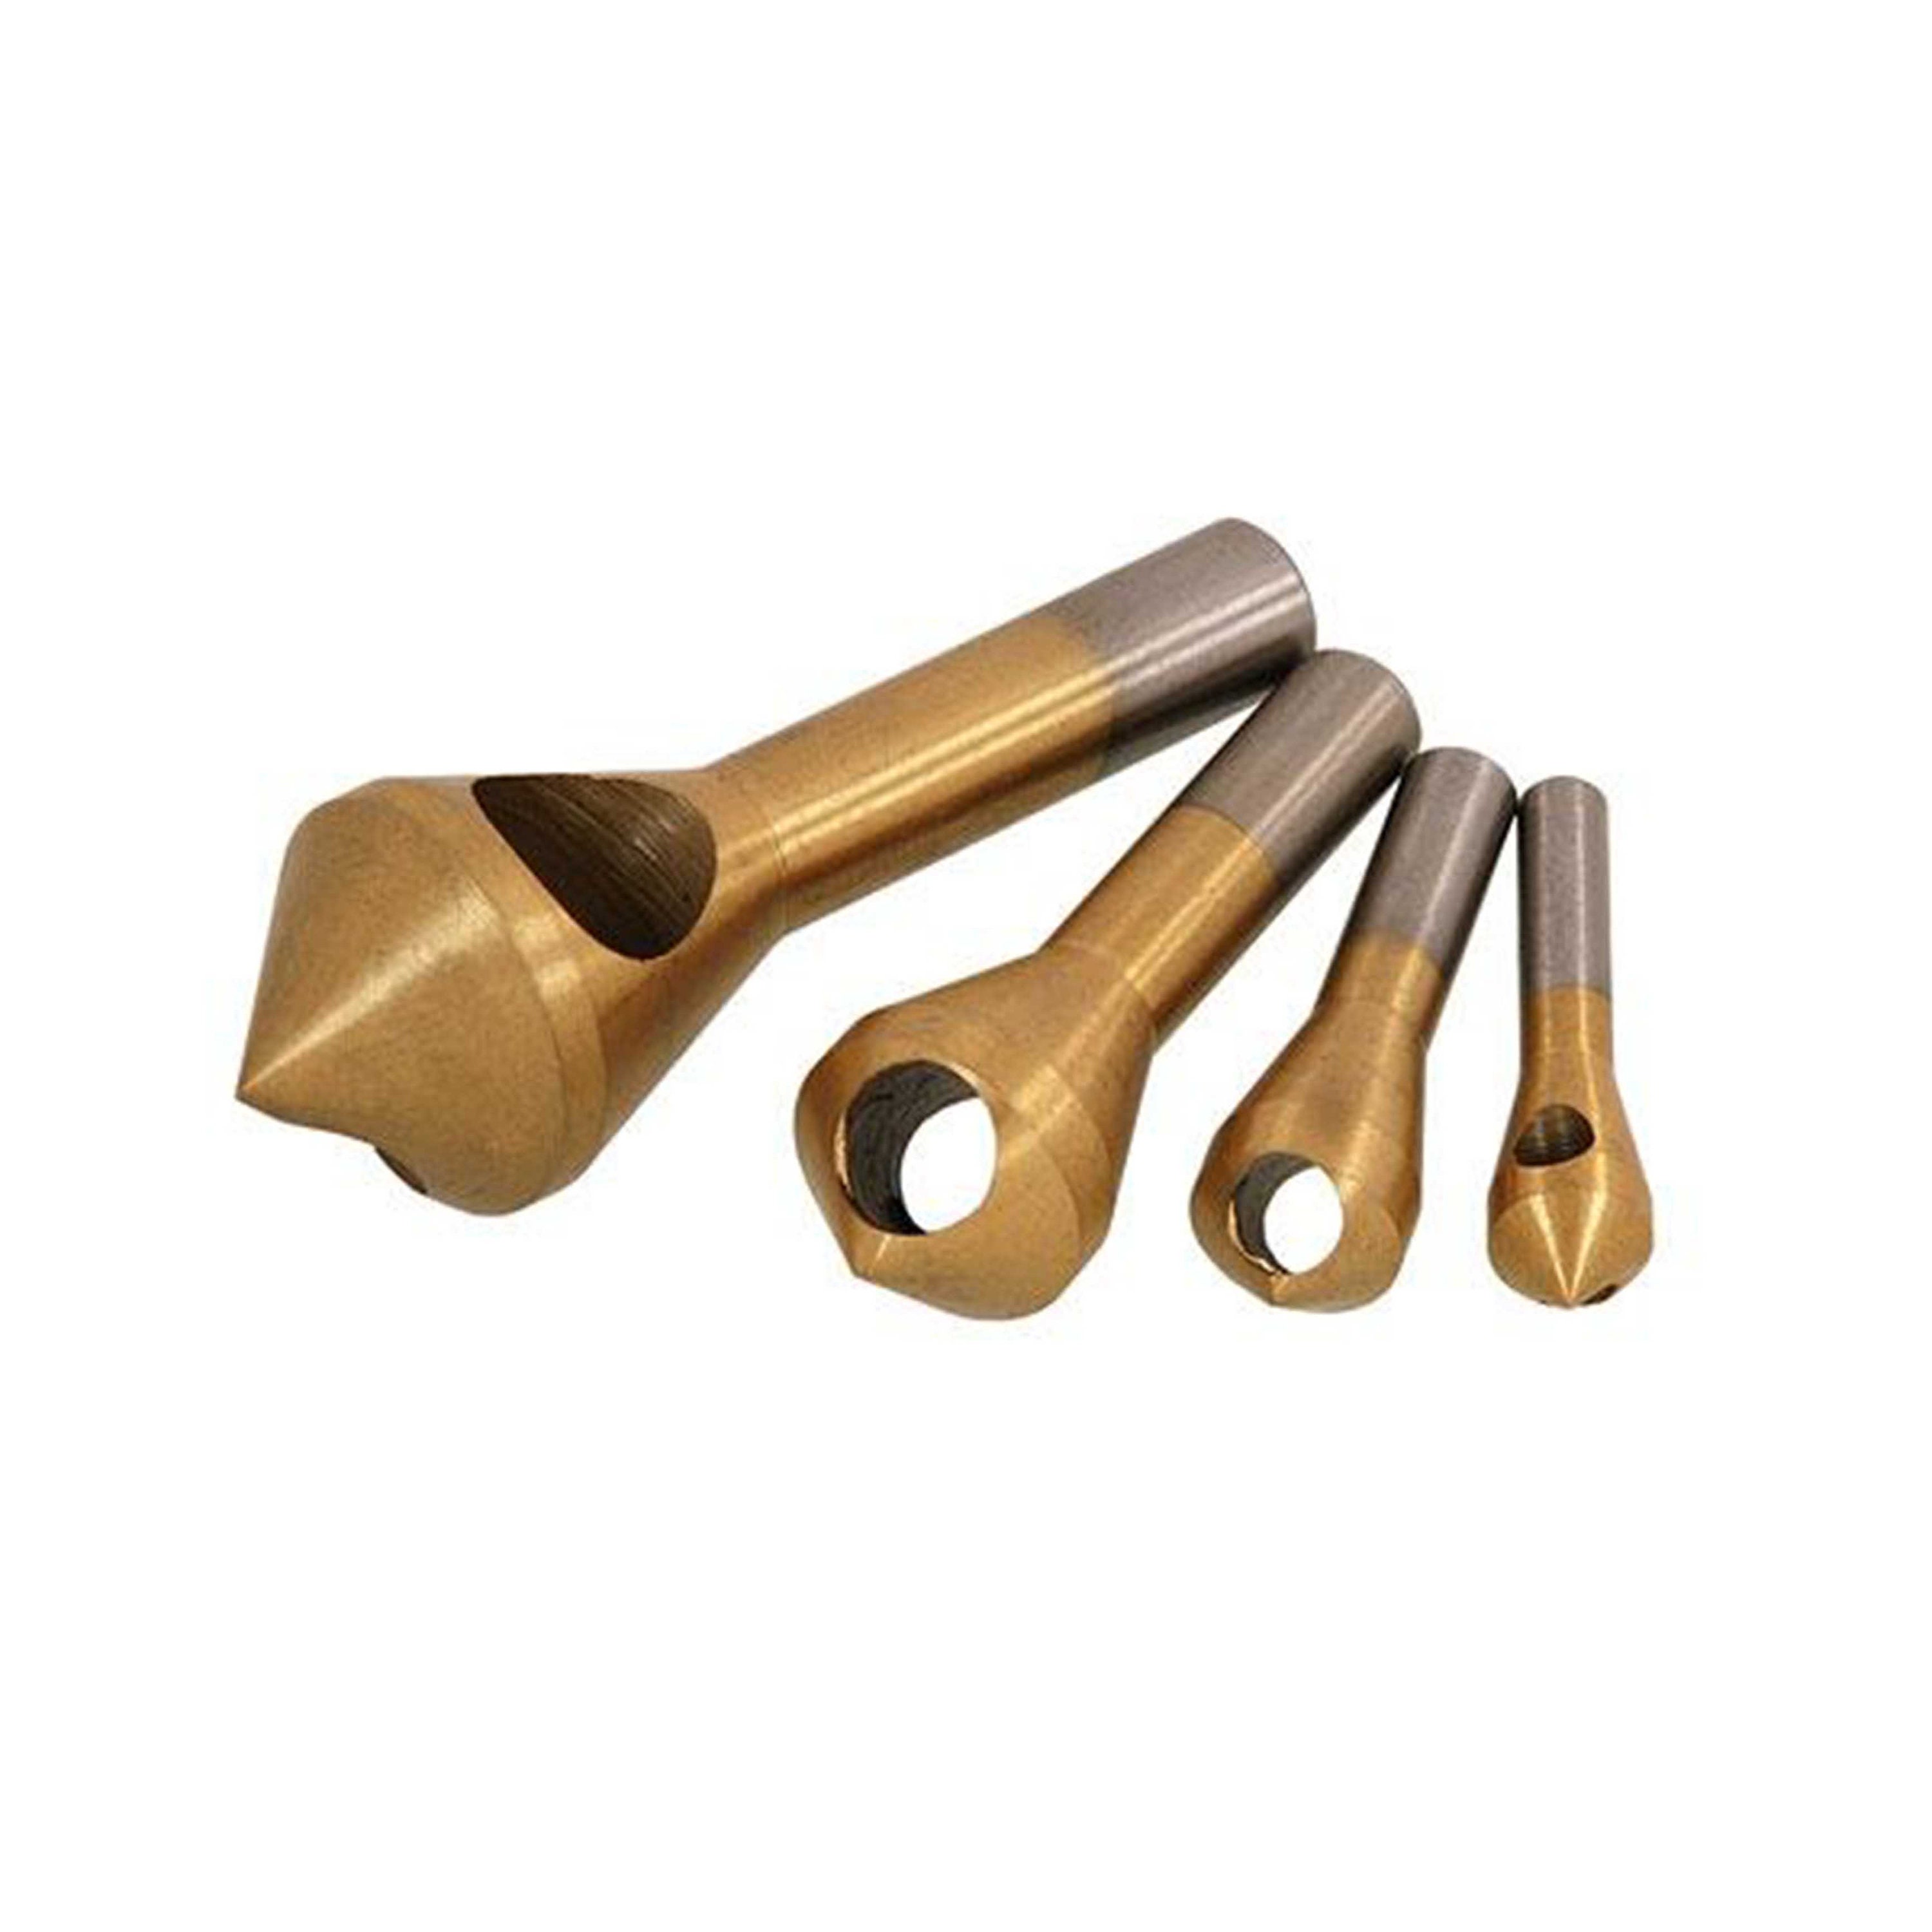 Buy 4 Piece Titanium Coated Slotted Countersink HSS Drills Set for Cutting  Through Metal Wood Plastic Drilling Cone Hole & Chamfering the Edges Online  in India 